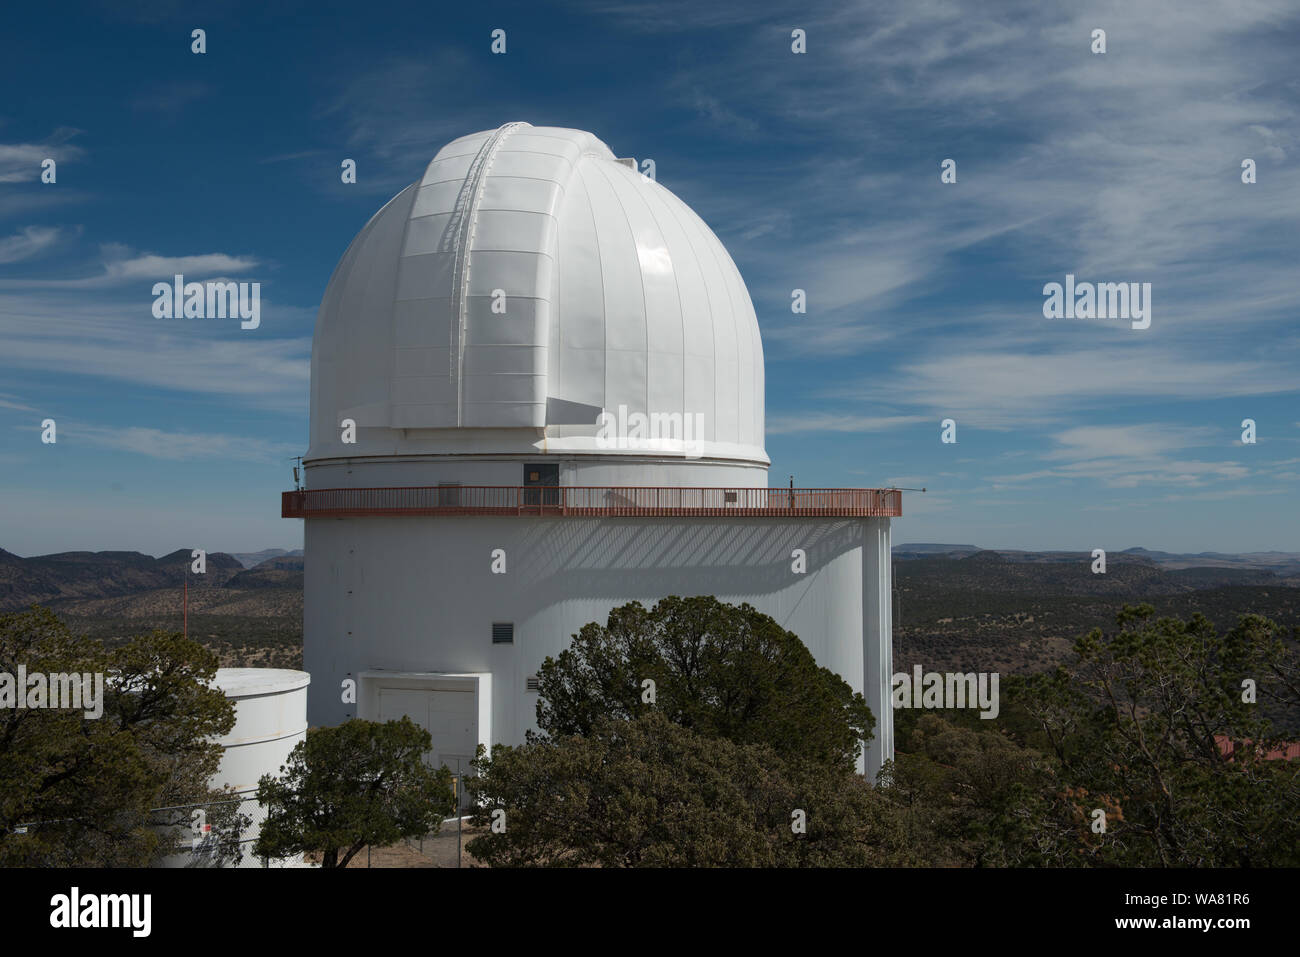 Building housing the Harlan J. Smith Telescope at the McDonald Observatory, an astronomical observatory located near the unincorporated community of Fort Davis in Jeff Davis County, Texas Stock Photo